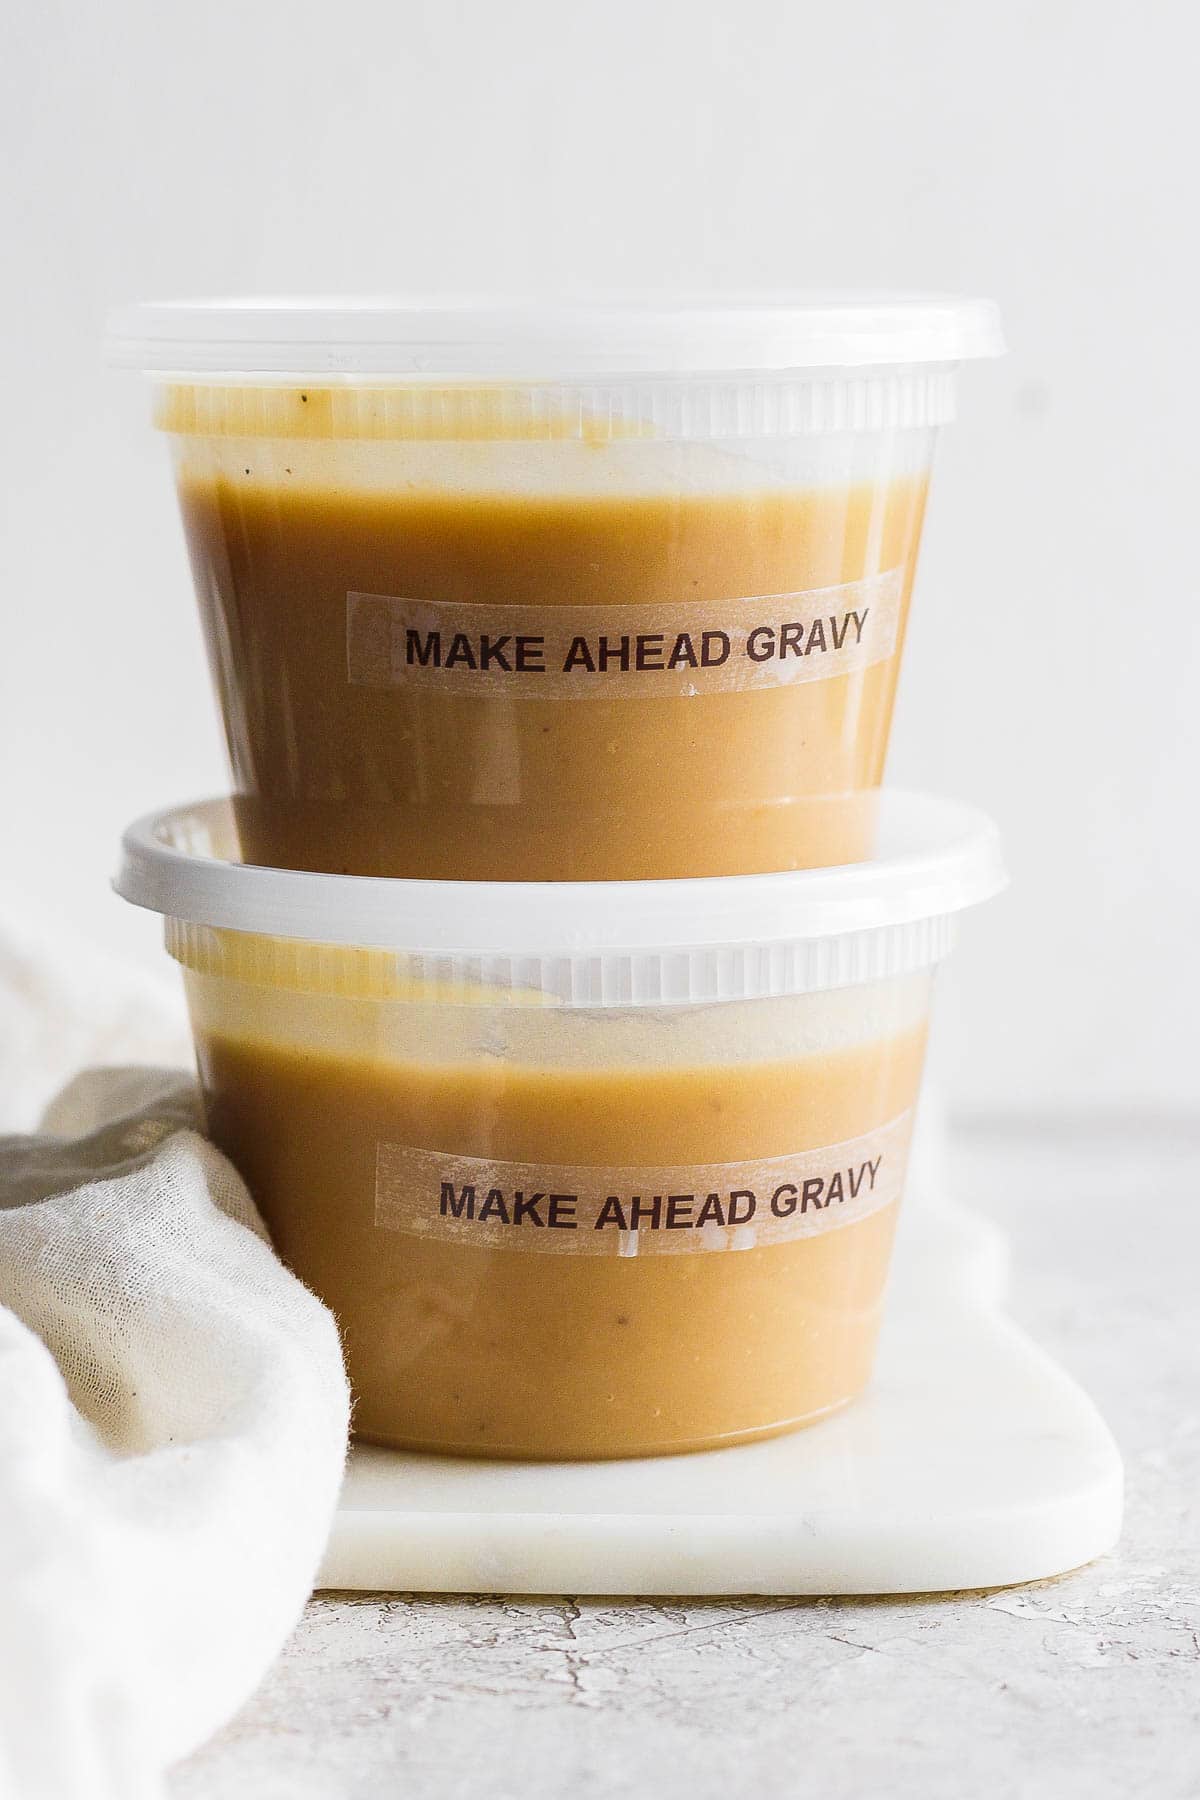 Two freezer safe containers of make ahead gravy.